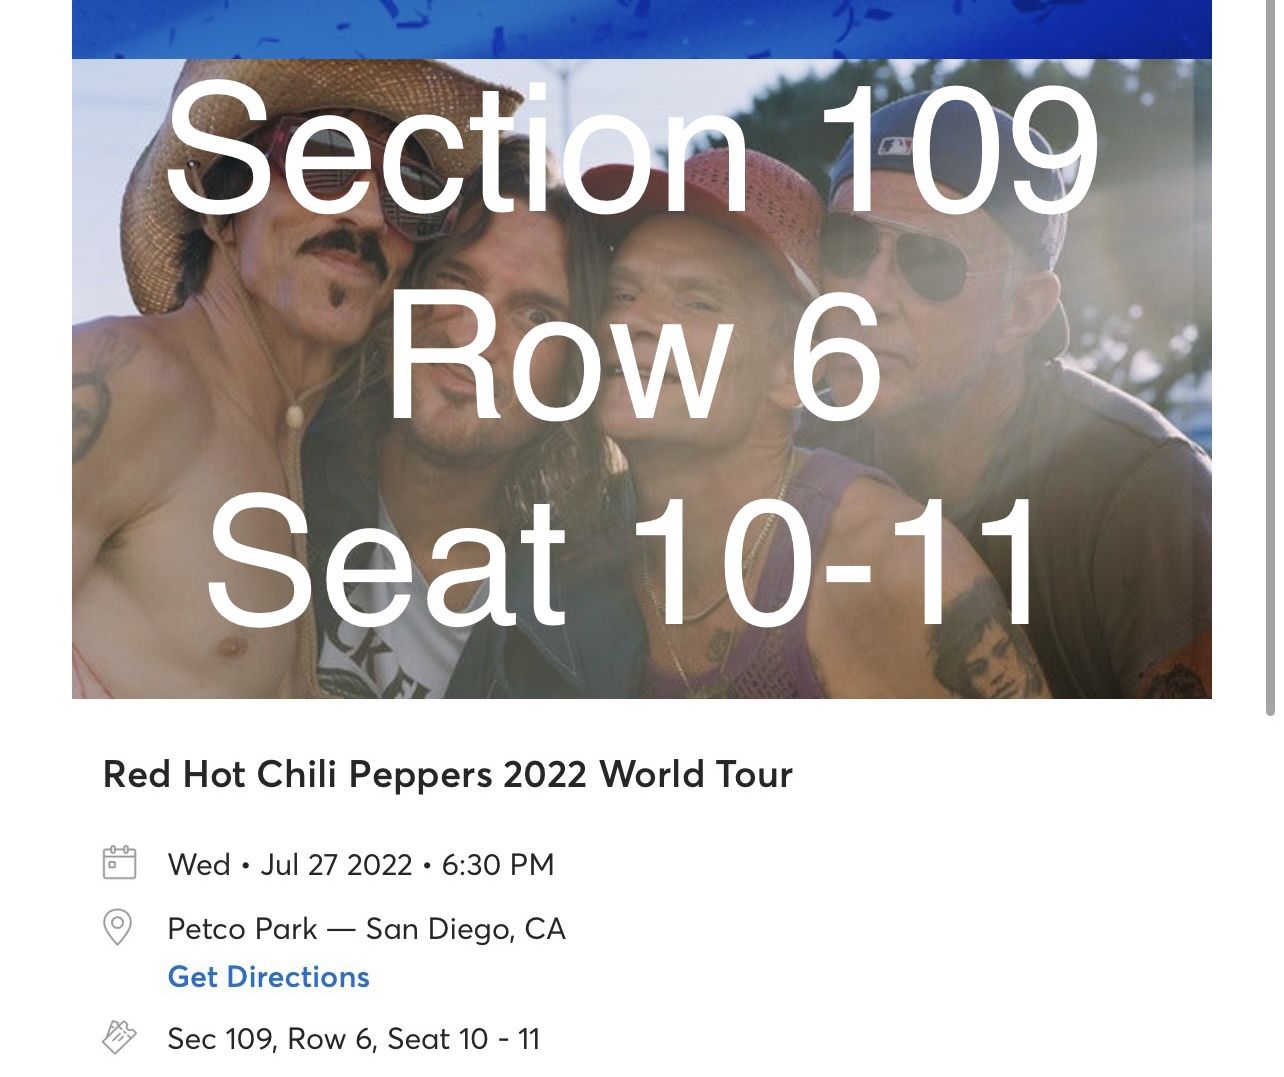 Red Hot Chili Peppers San Diego Tickets 2022 Wed Jul 27, 2022 6:30 PM